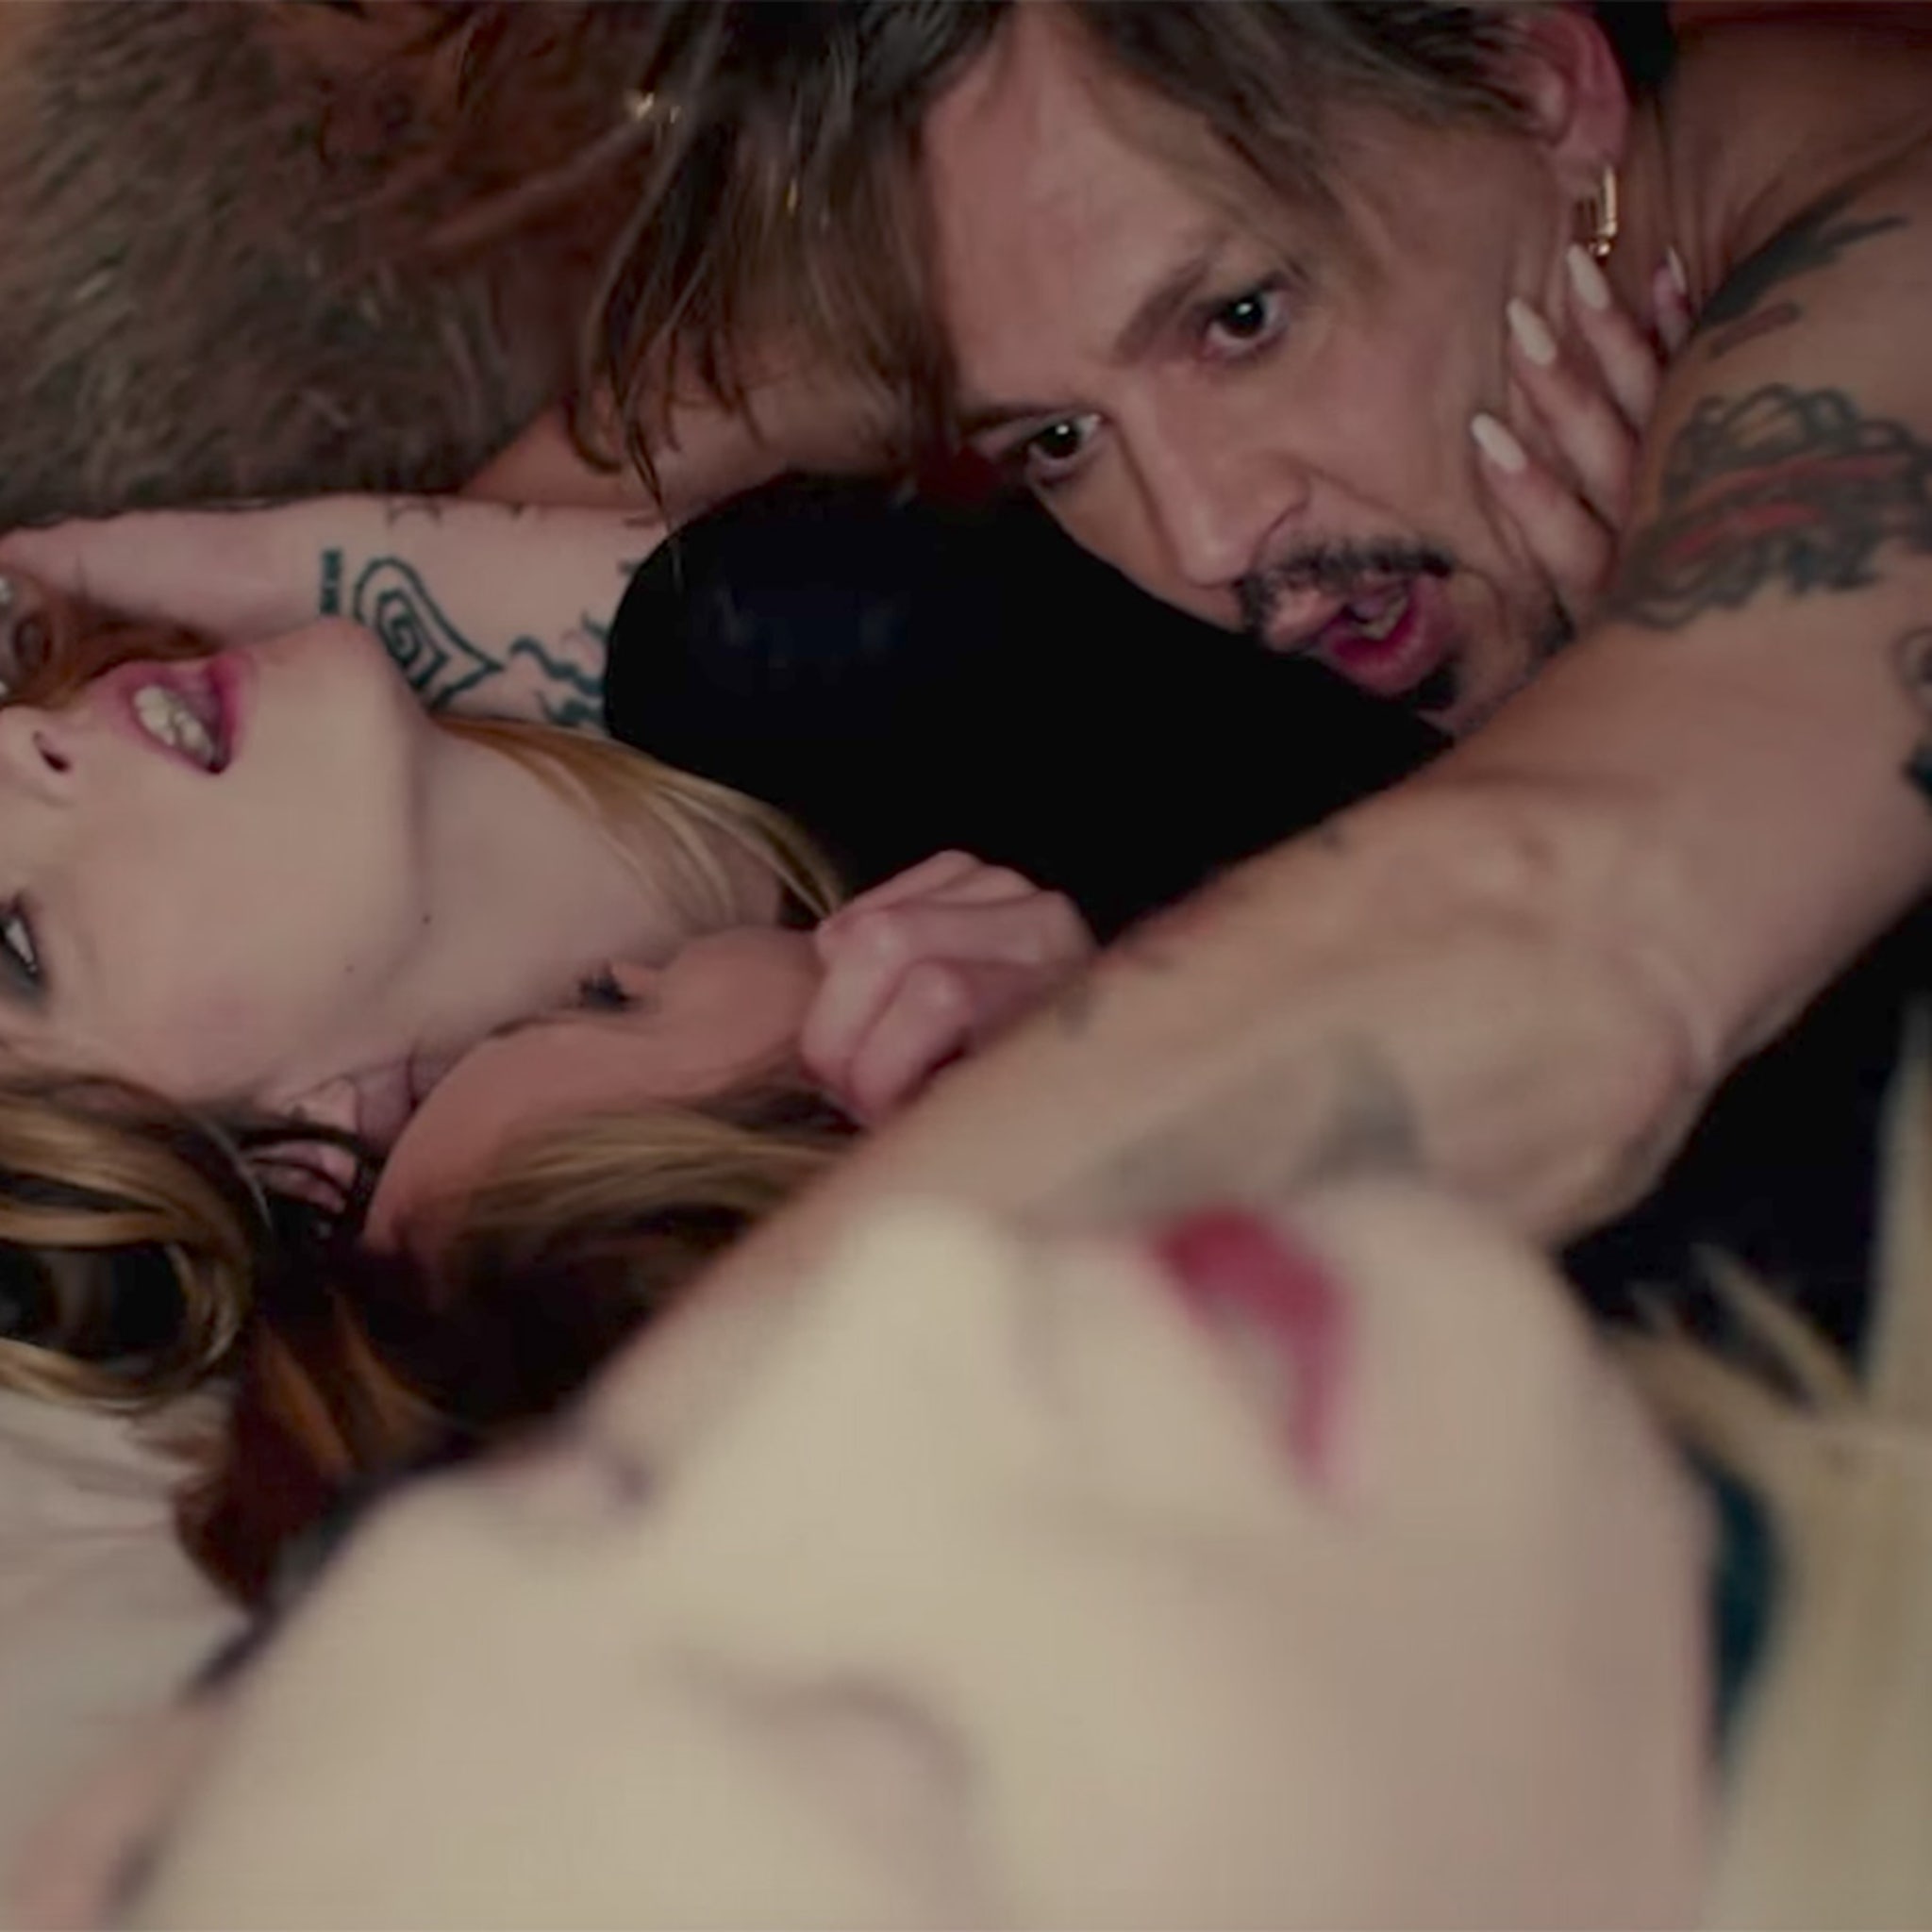 Johnny Depp Has a Foursome with Marilyn Manson In NSFW KILL4ME Music Video